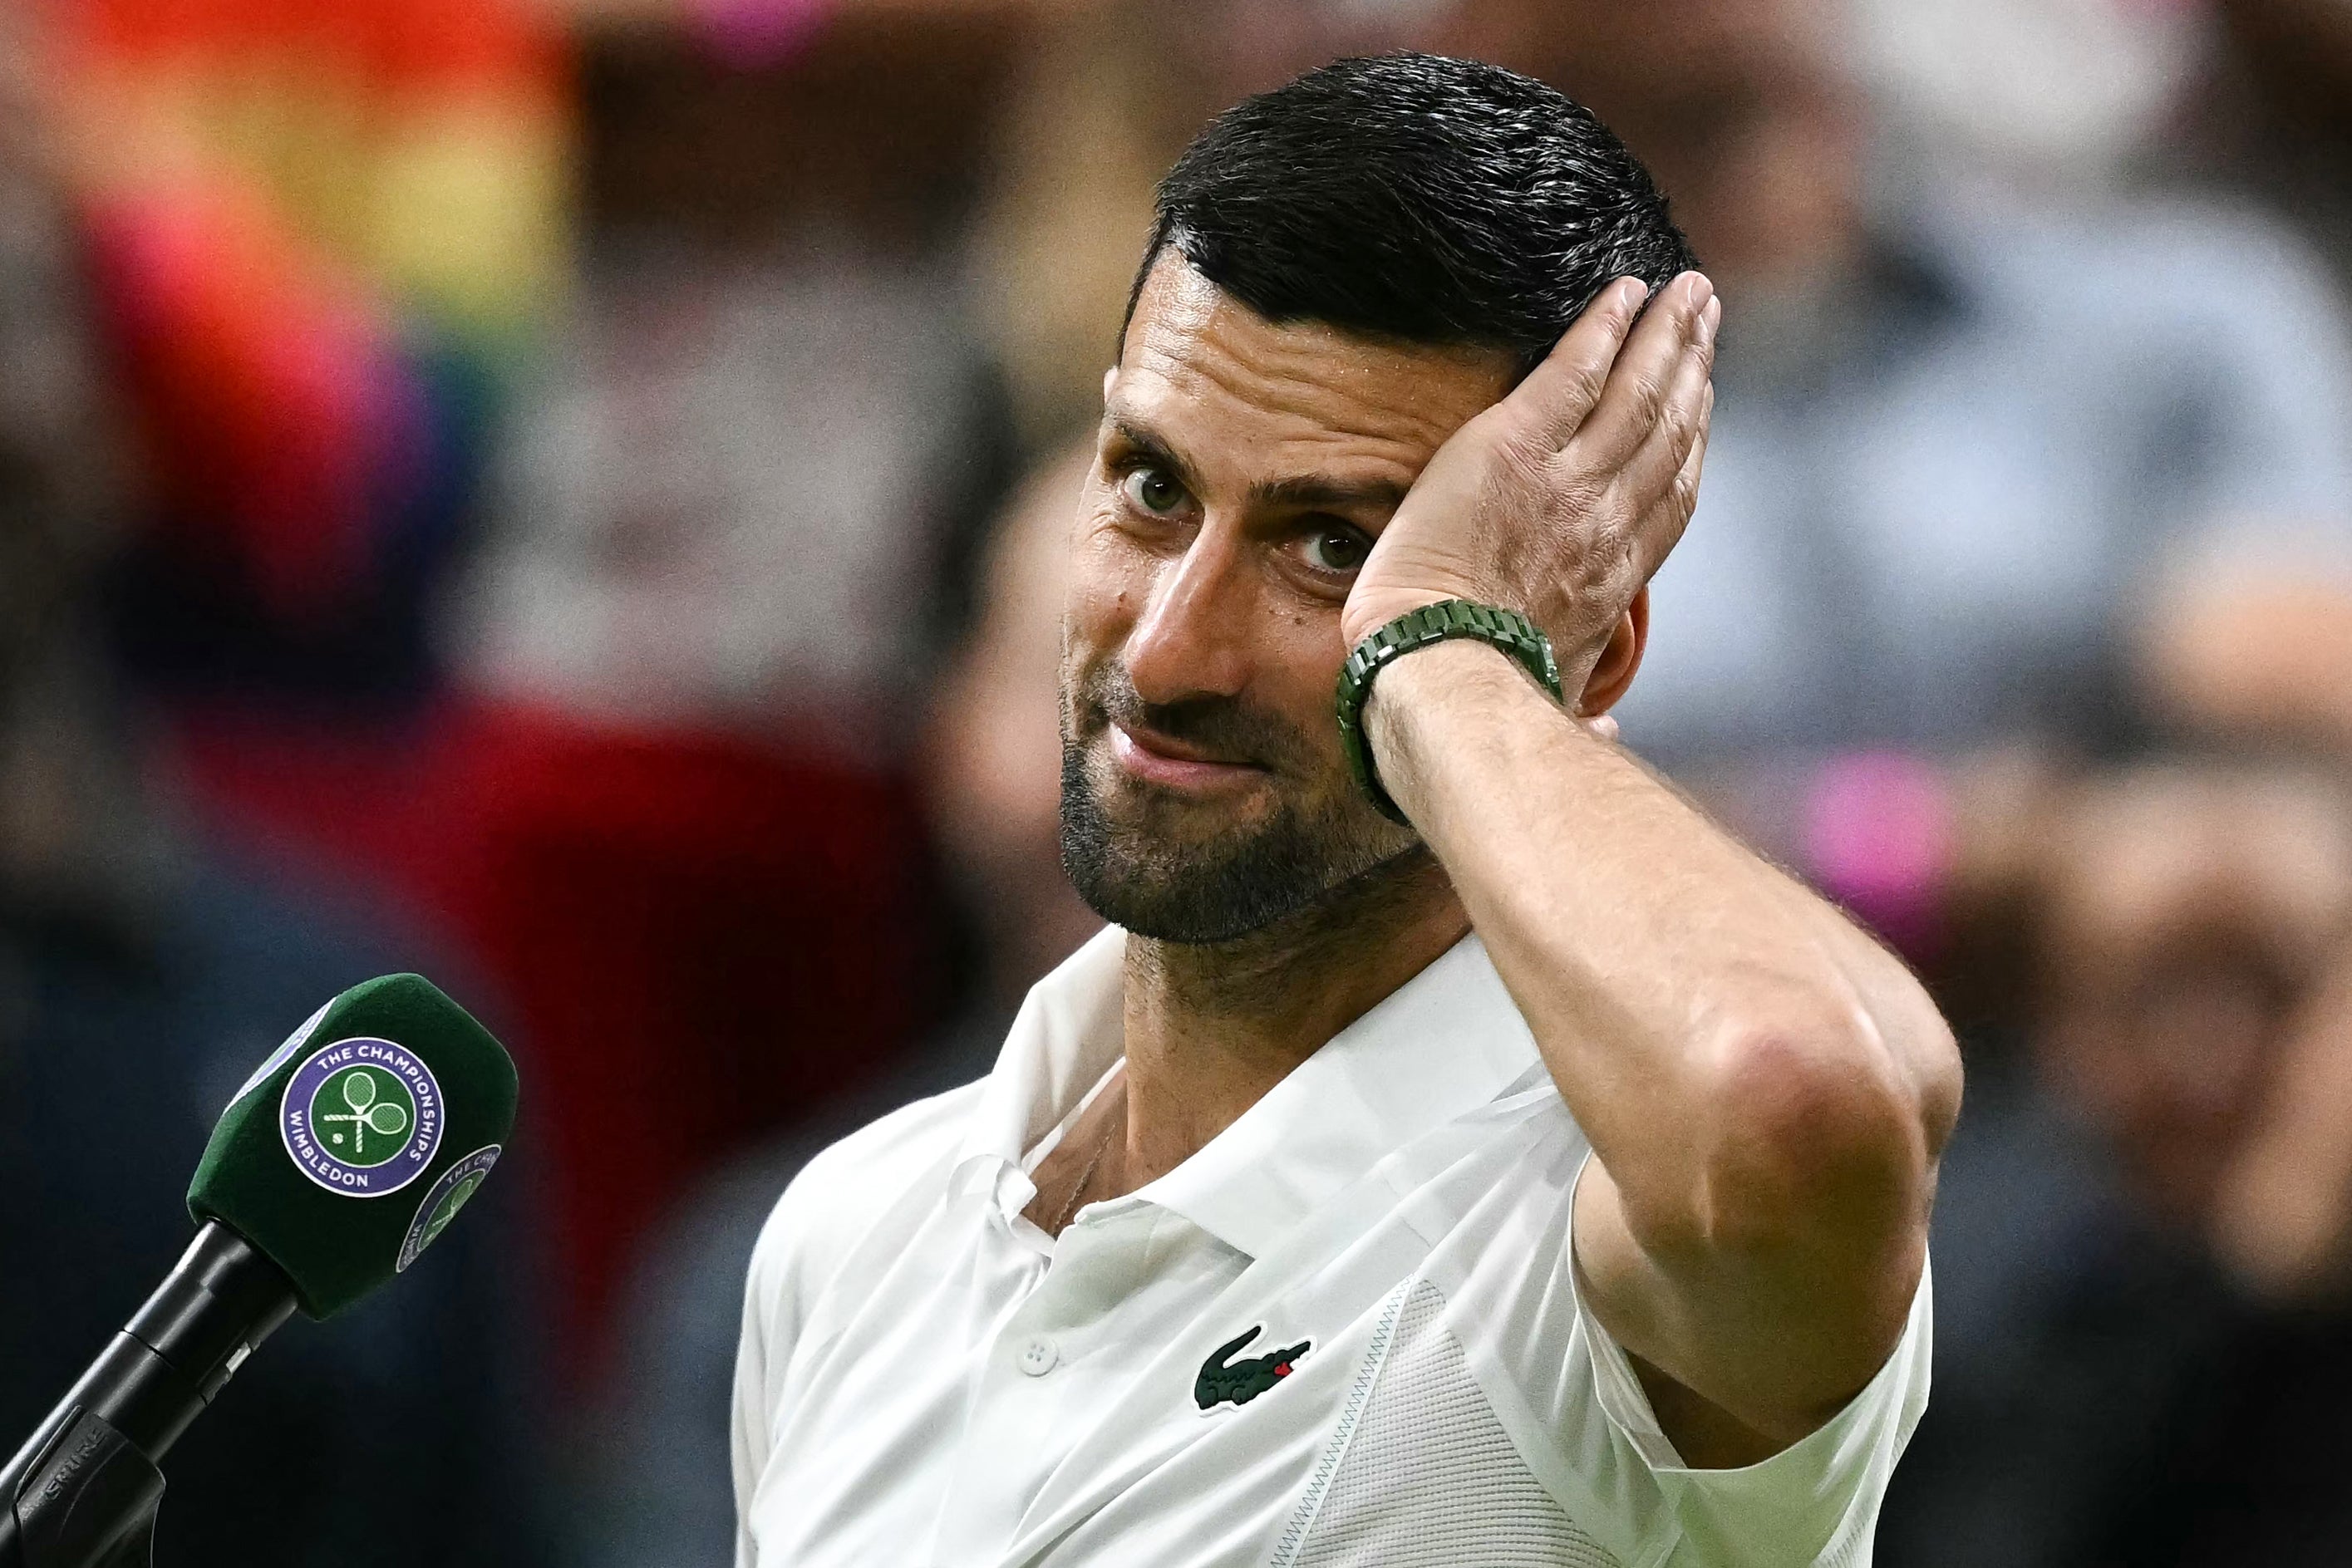 It means Novak Djokovic receives a walkover to the semi-finals